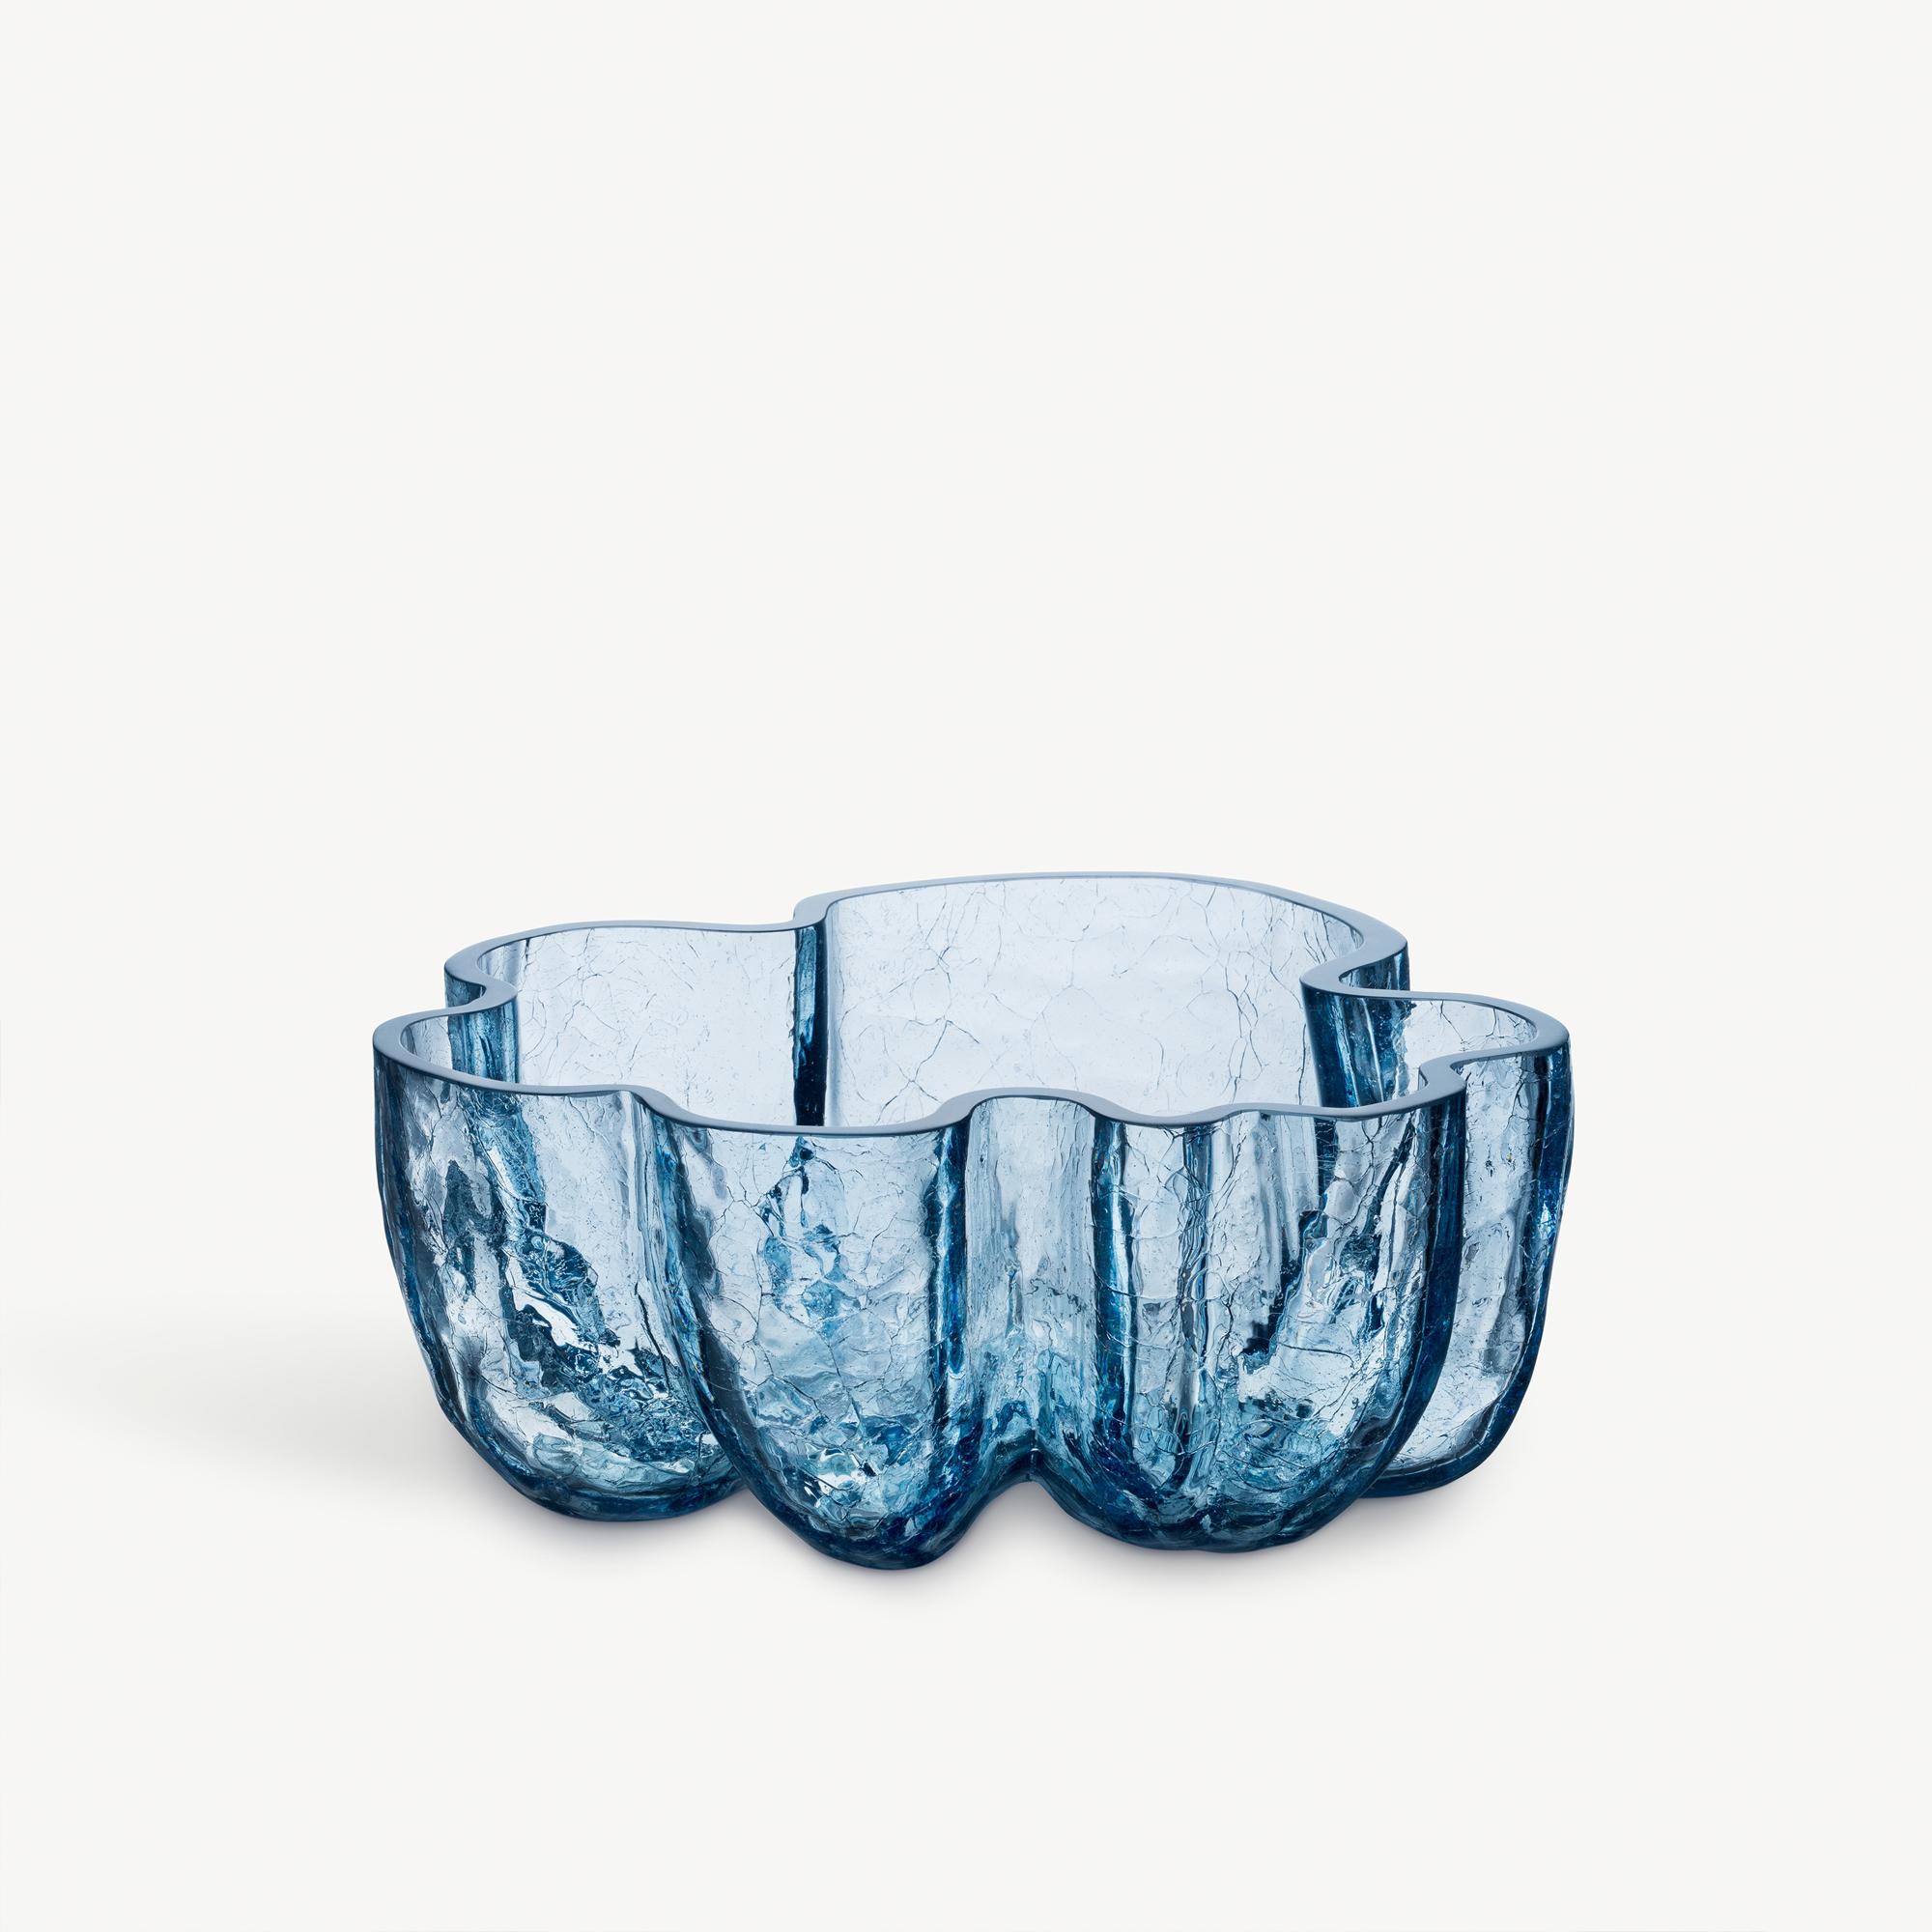 Crackle and thunder – a magical wonder! At Kosta Boda, we marvel at beautifully preserved cracks in glass. The bowl in circular glass from the Crackle collection has an expressive, sculptural exterior created using an old handicraft technique where